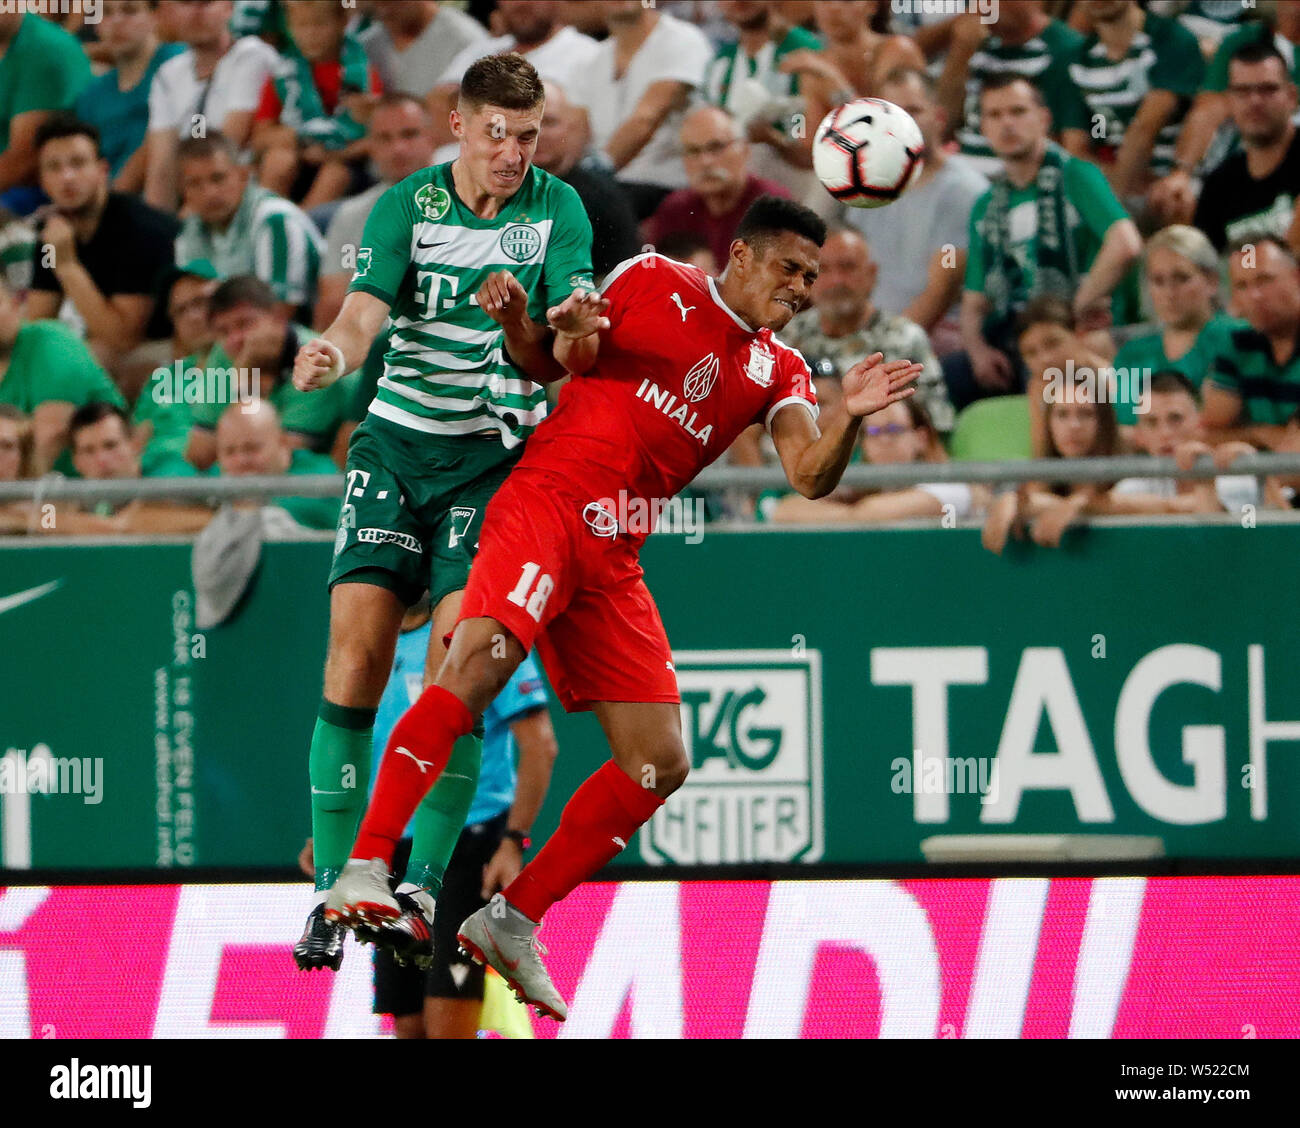 BUDAPEST, HUNGARY - JULY 24: (l-r) Danylo Ihnatenko of Ferencvarosi TC  battles for the ball in the air with Pena Beltre of Valletta FC during the  UEFA Champions League Qualifying Round match